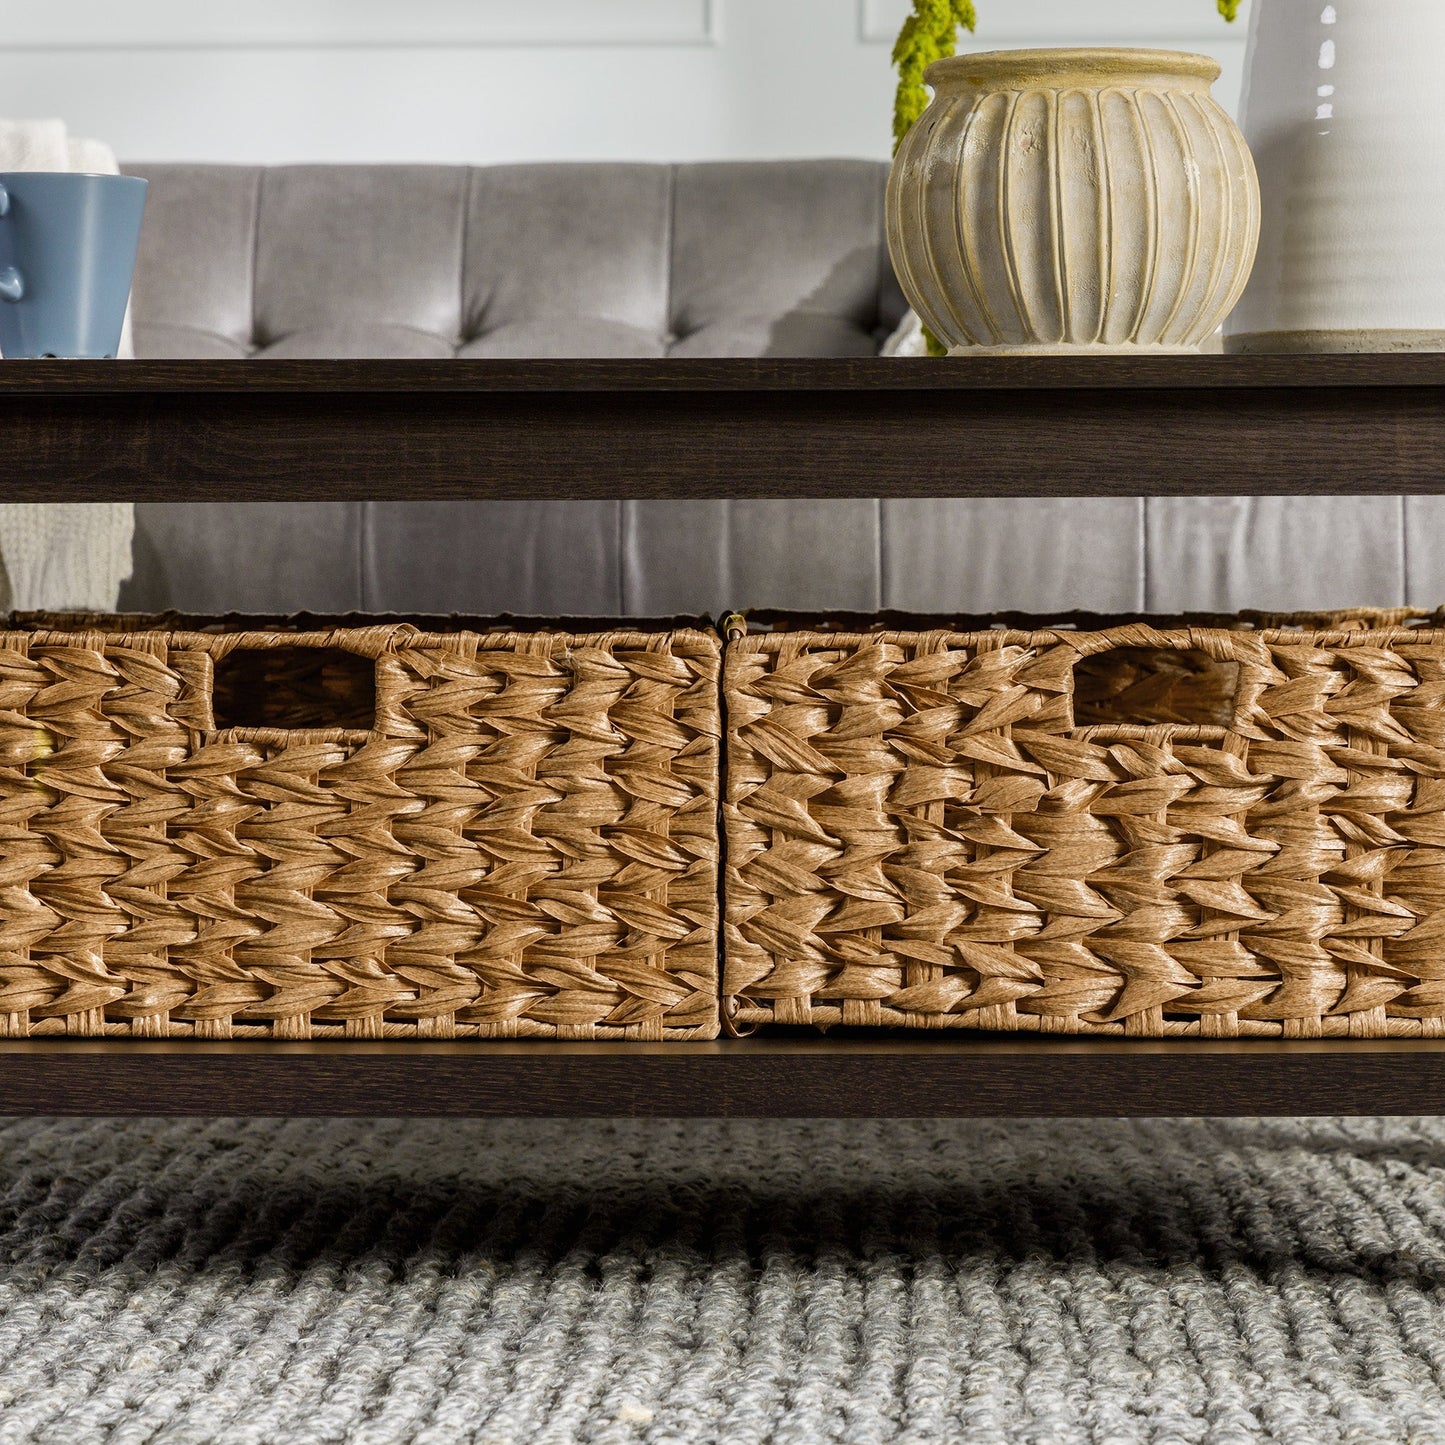 Mission Storage Coffee Table with Baskets